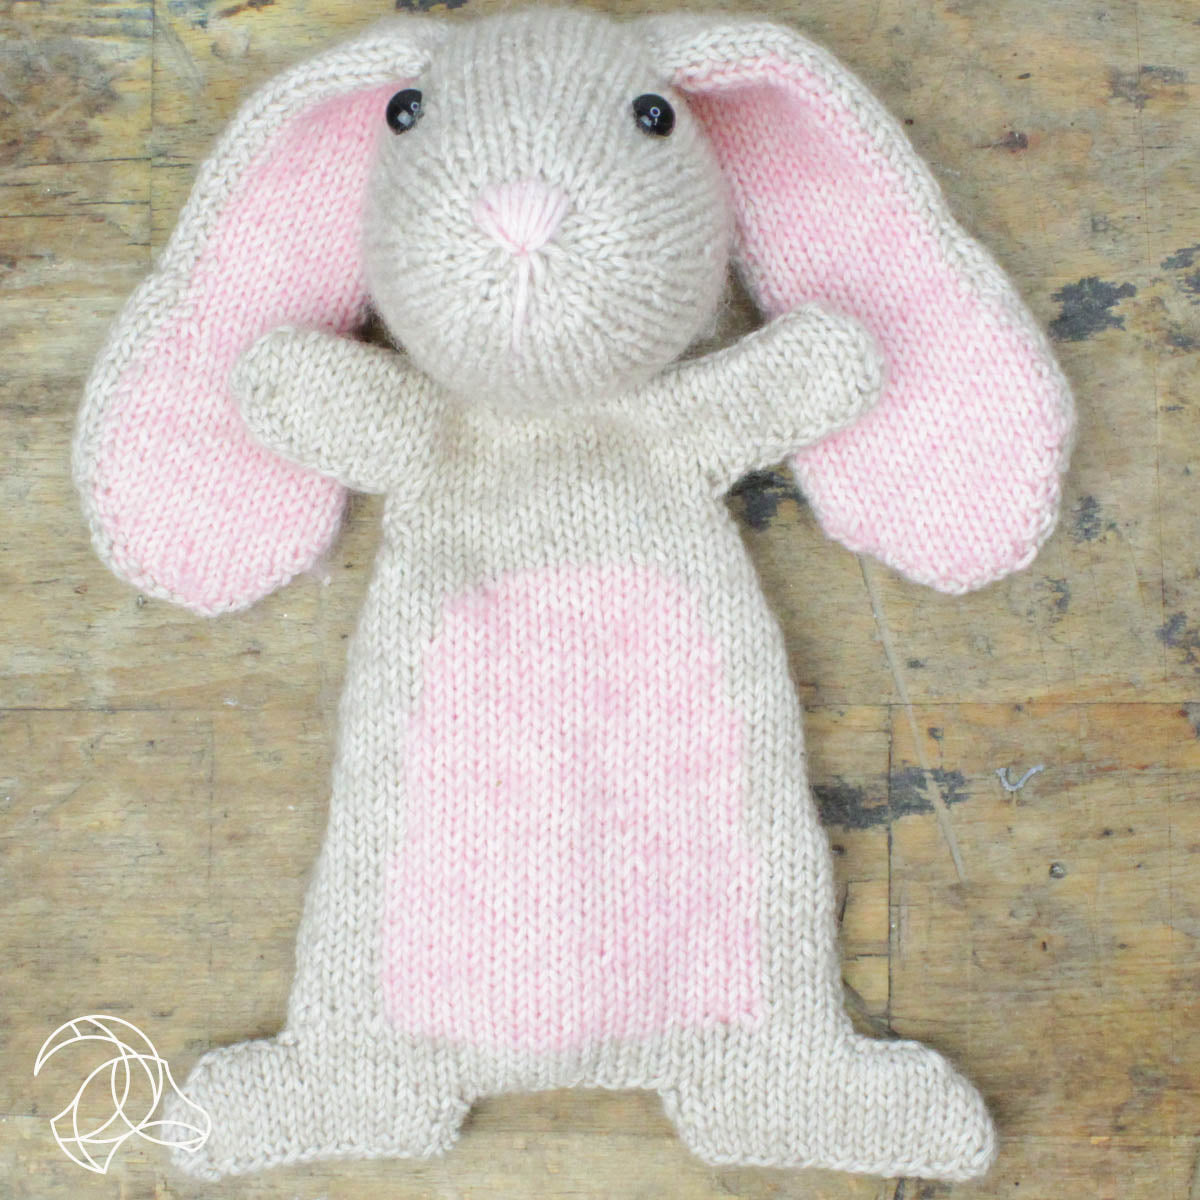 Bunny Rabbit Knitting Kit - His Name is Doutze and he is the Cutest!